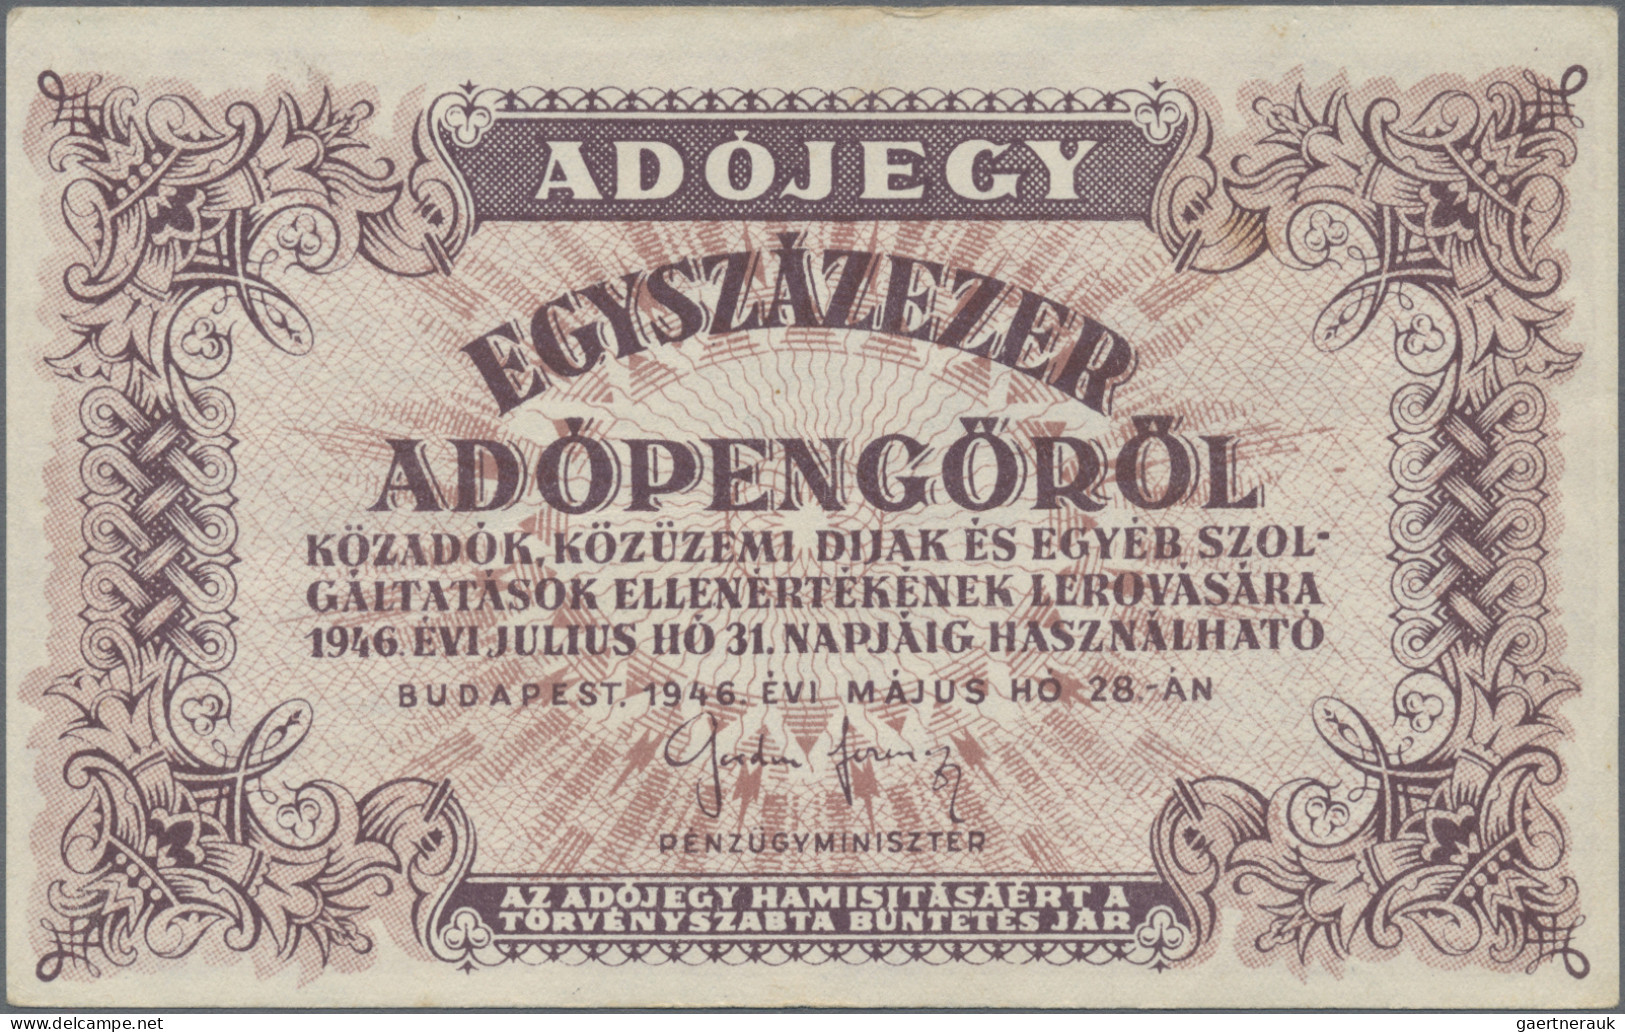 Hungary: Ministry of Finance, set with 10.000, 50.000, 100.000 and 500.000 Adope